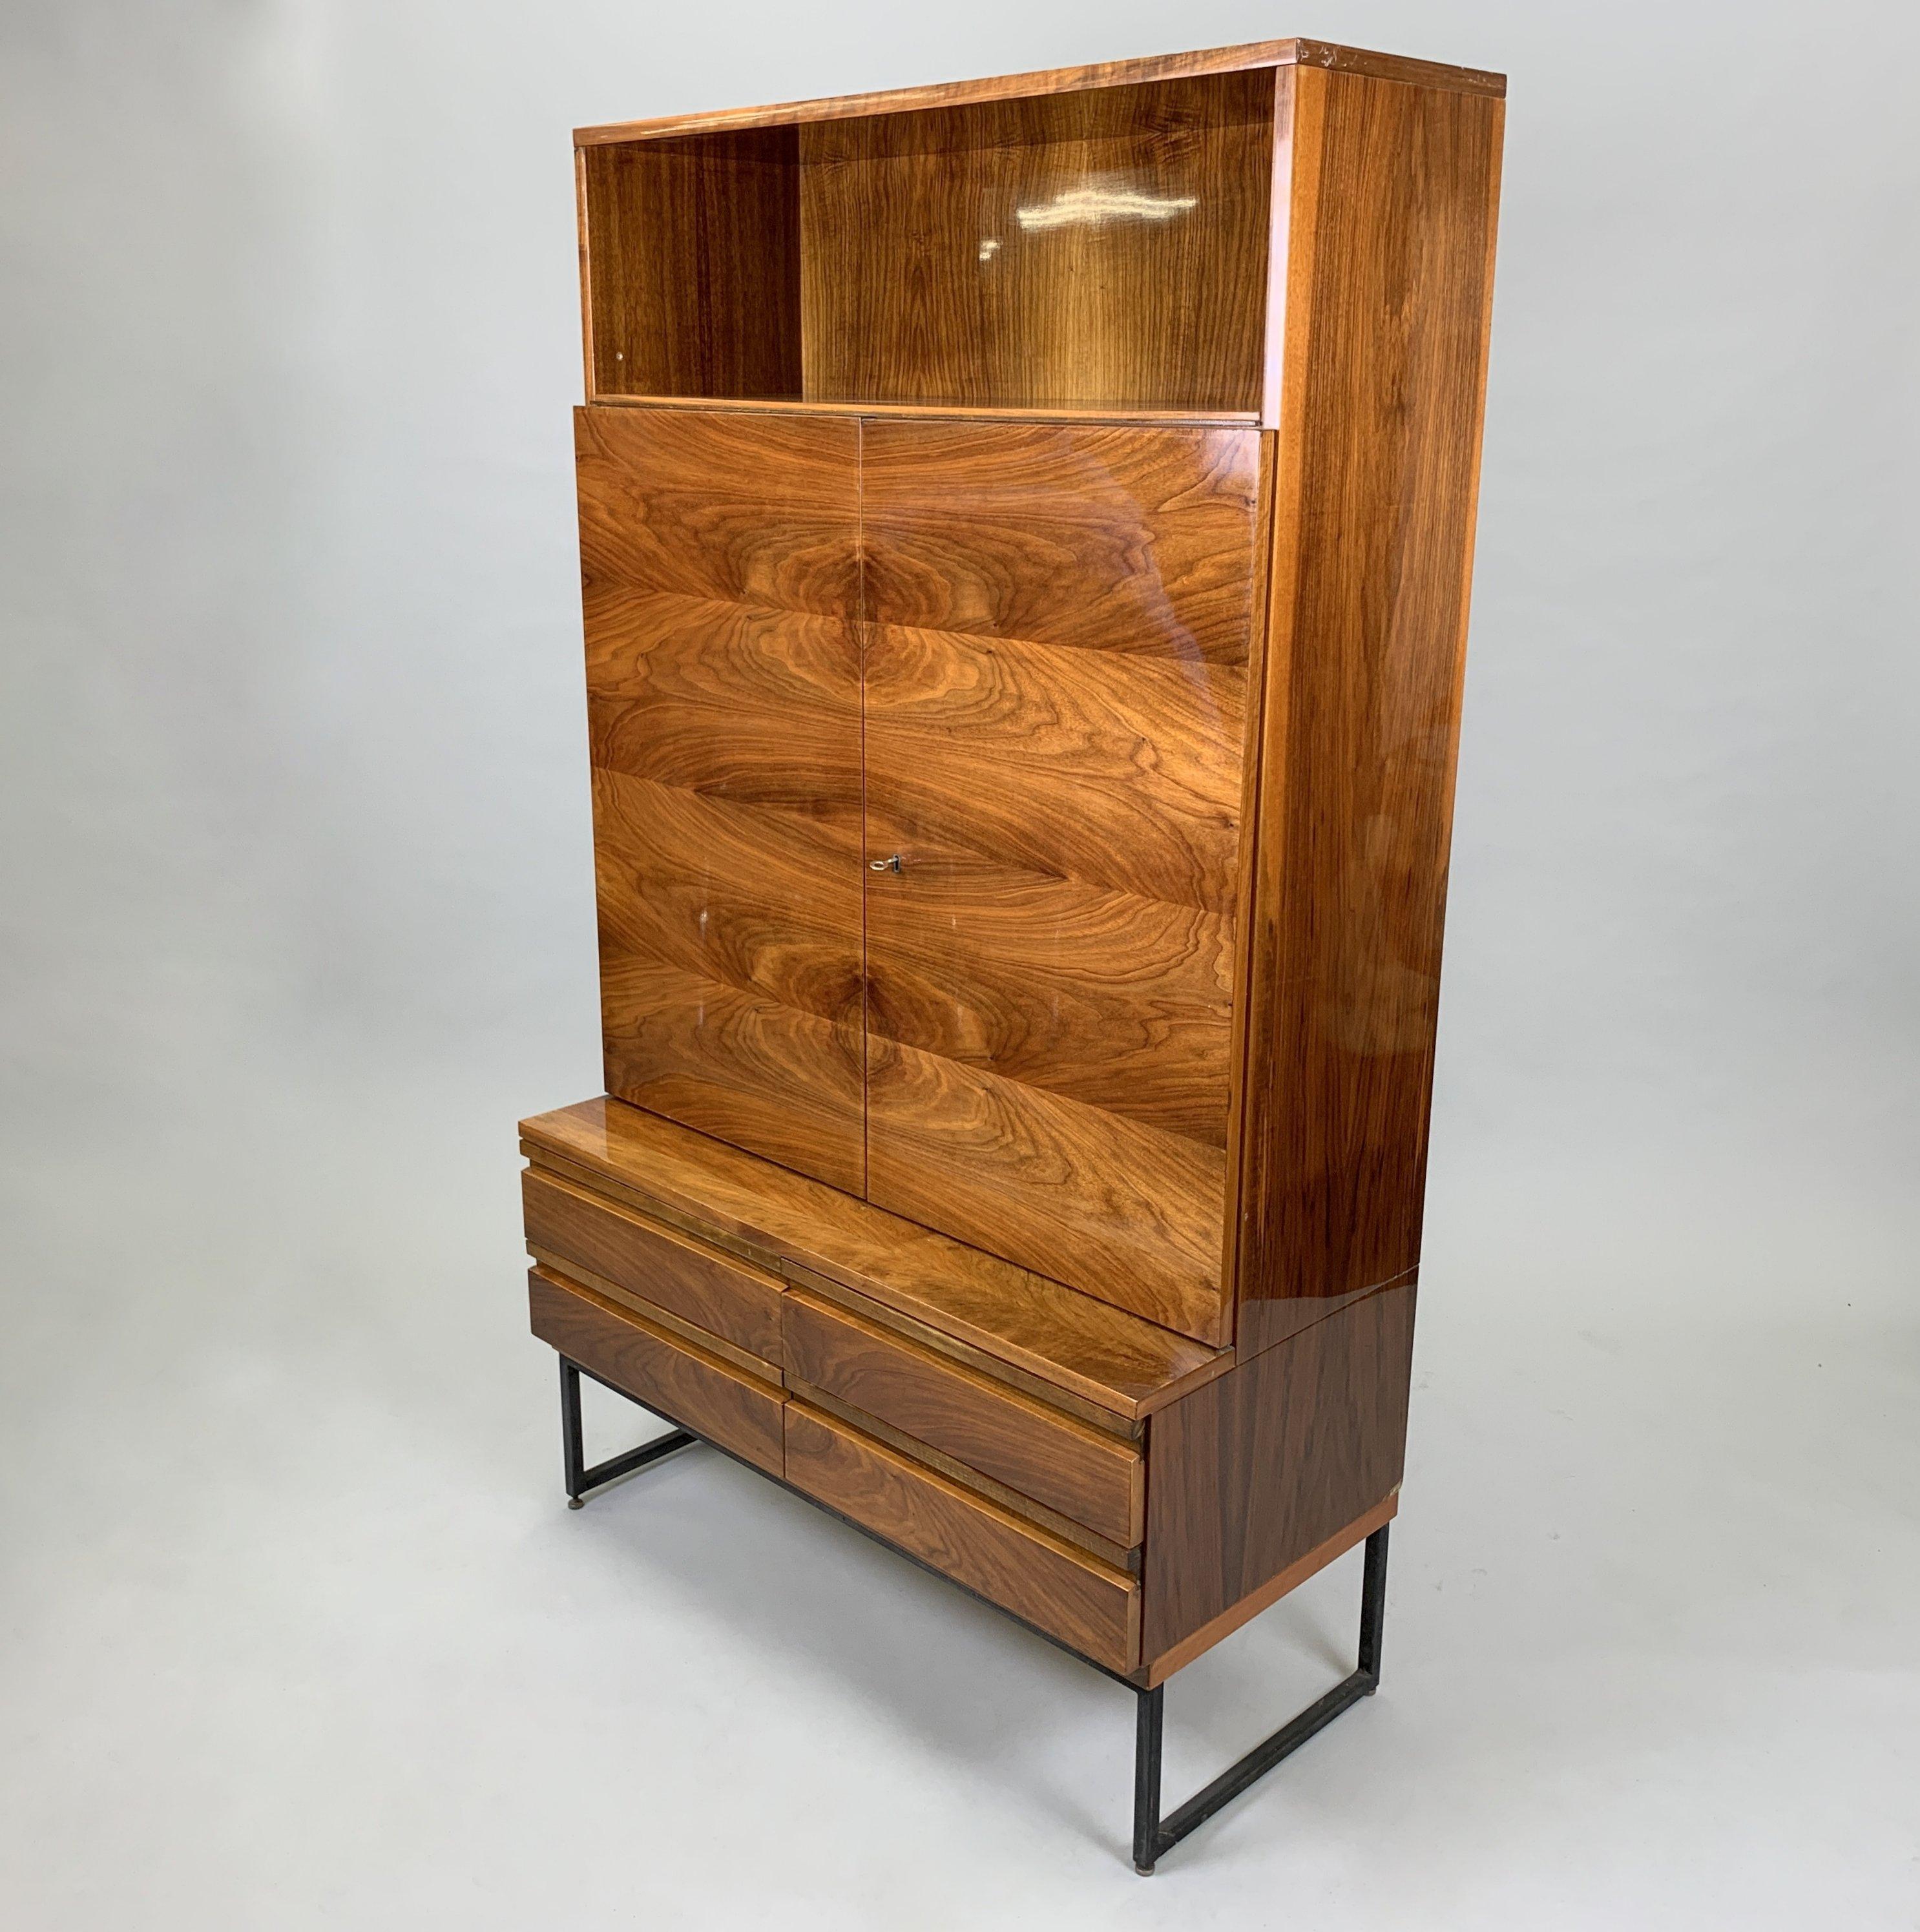 Vintage cabinet with shelves and drawers from 'Belmondo' collection made in high gloss. Made in Czechoslovakia by Novy Domov (marked) in the 1970s. Good original condition.